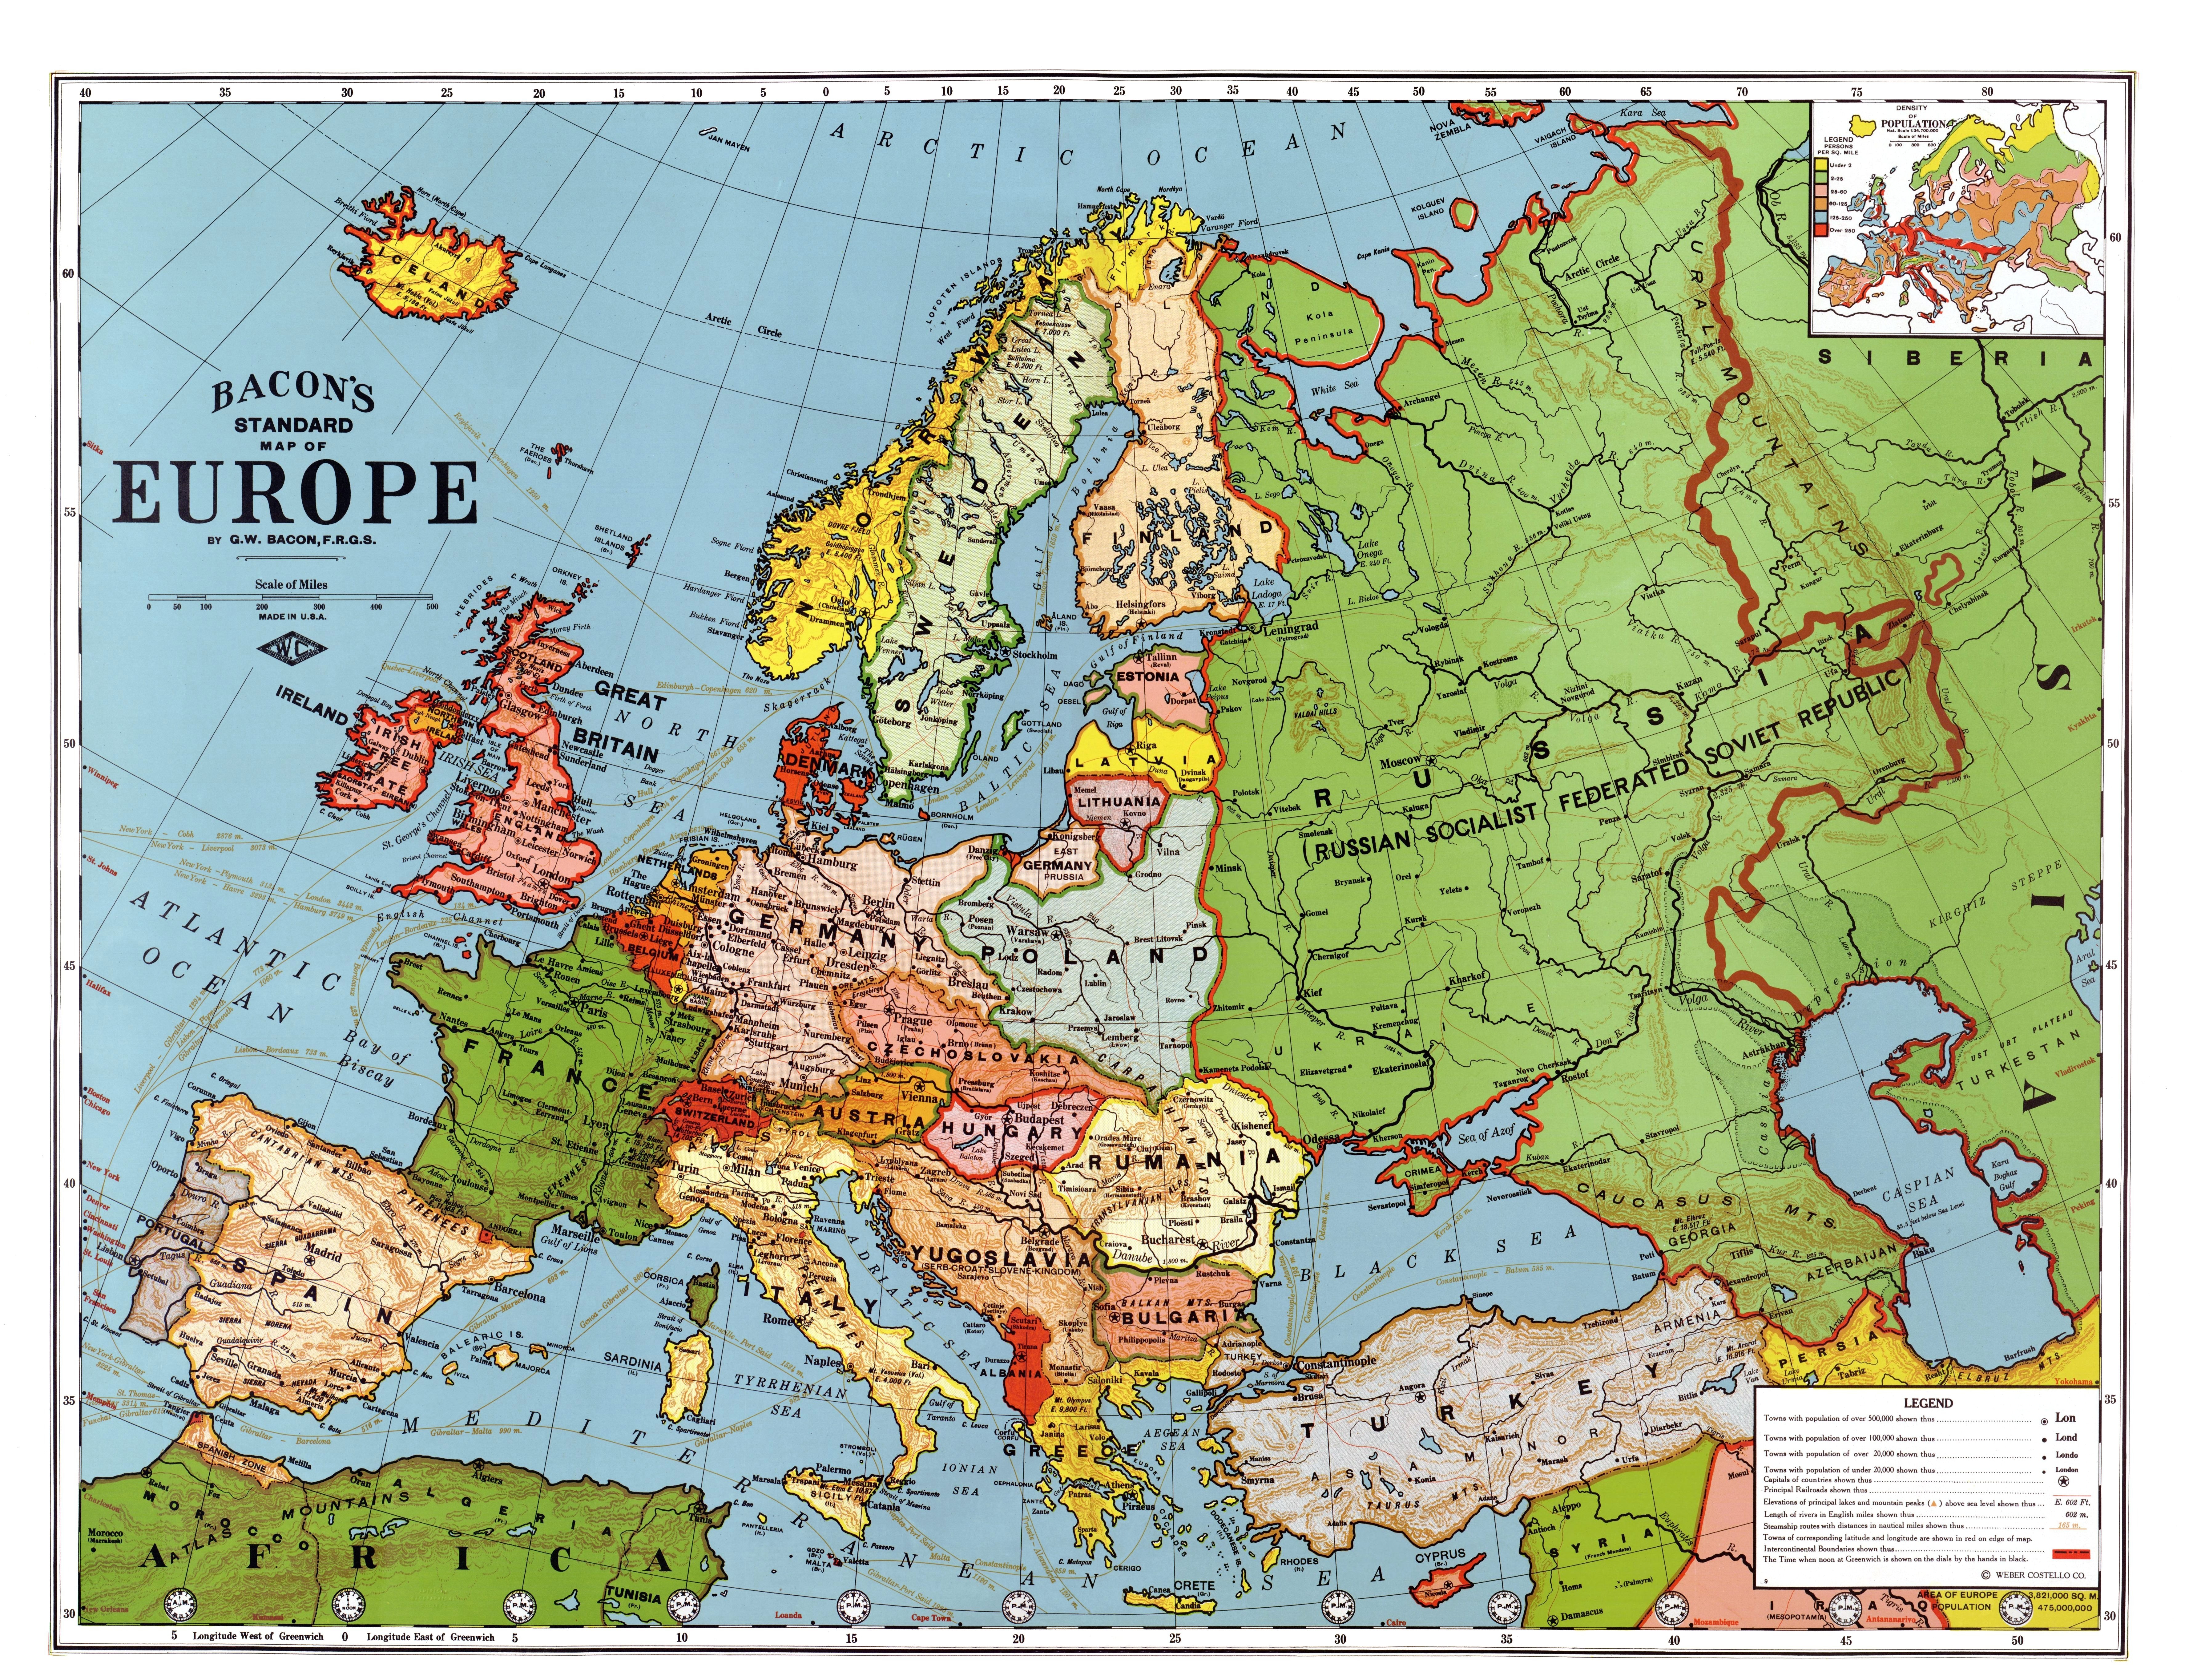 Europe Outline Maps - Bacon's Map Of Europe , HD Wallpaper & Backgrounds